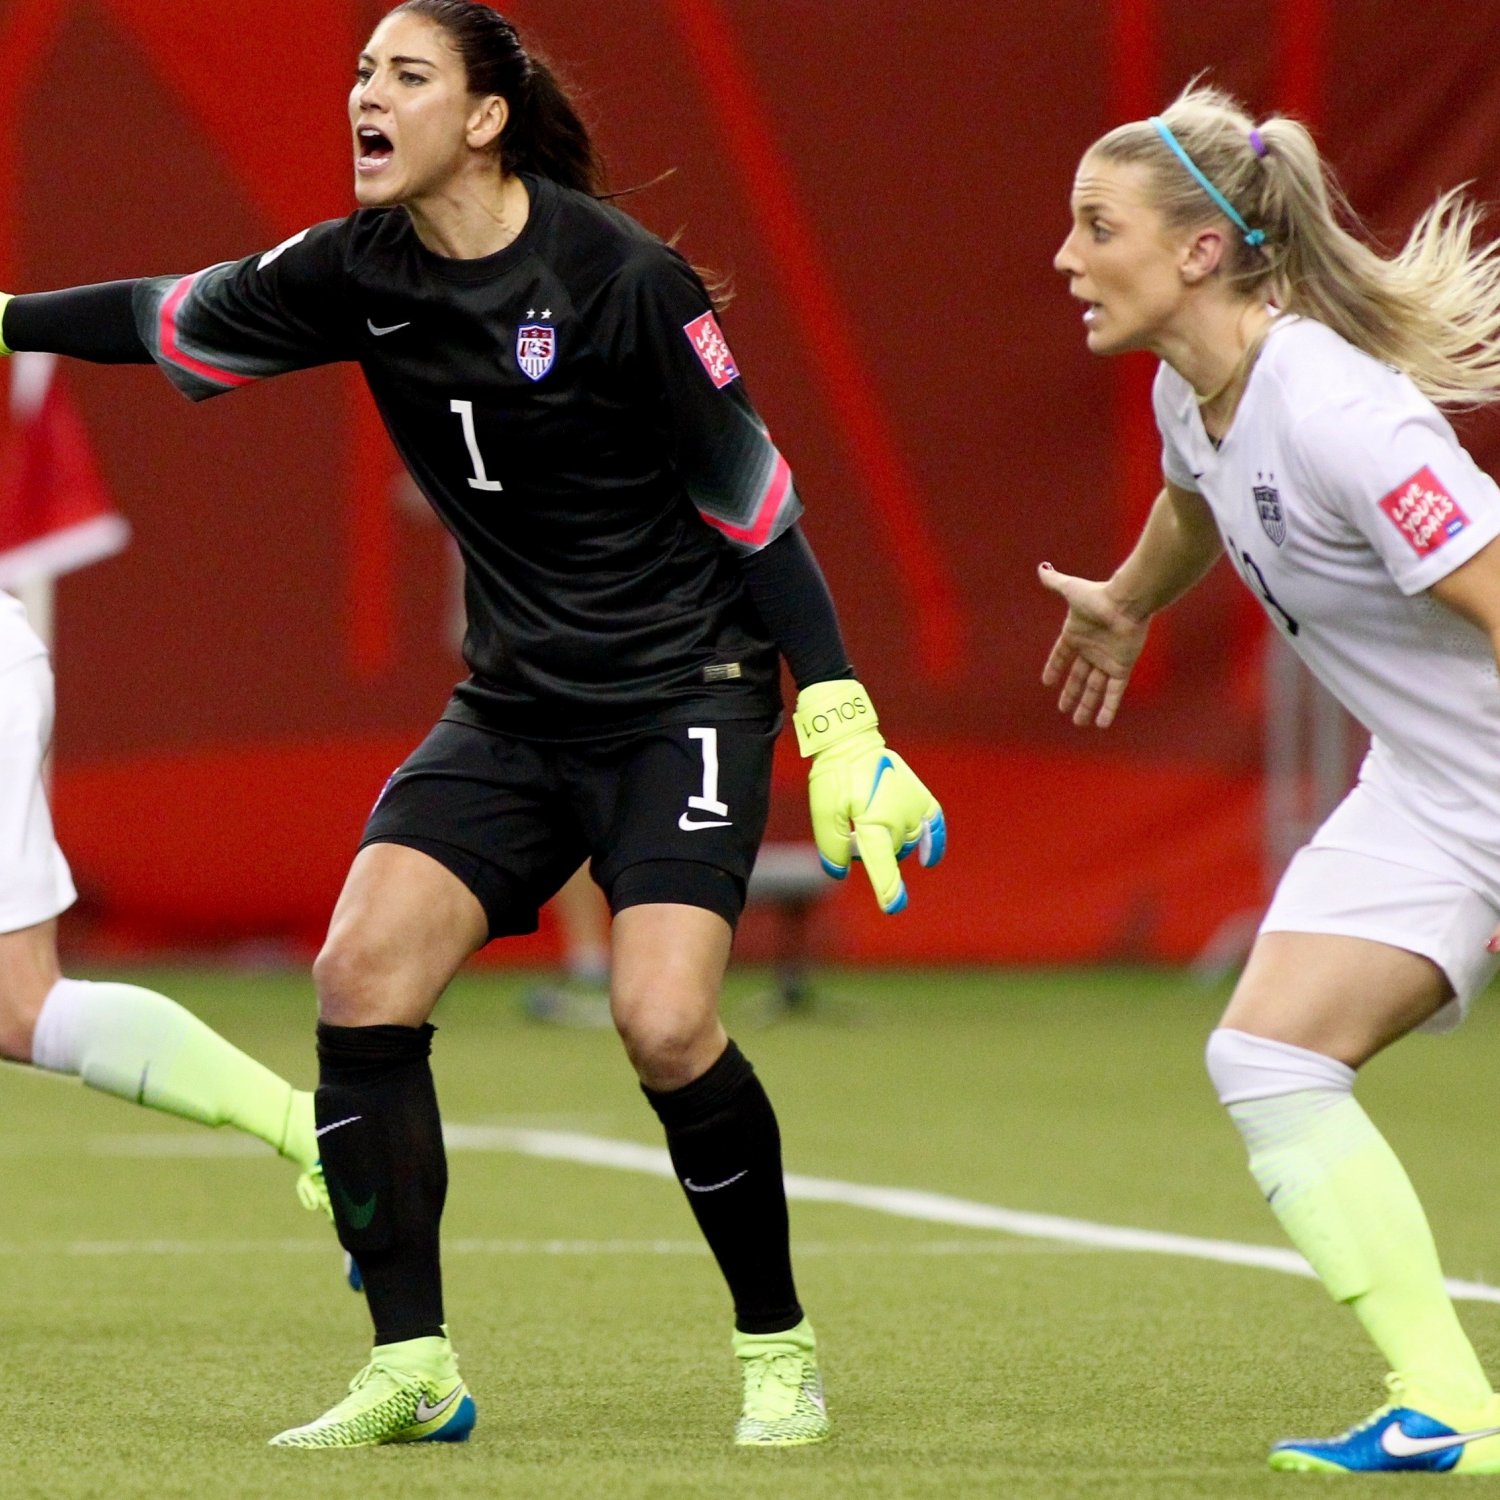 USA vs. Japan Live Score, Highlights from Women's World Cup Final